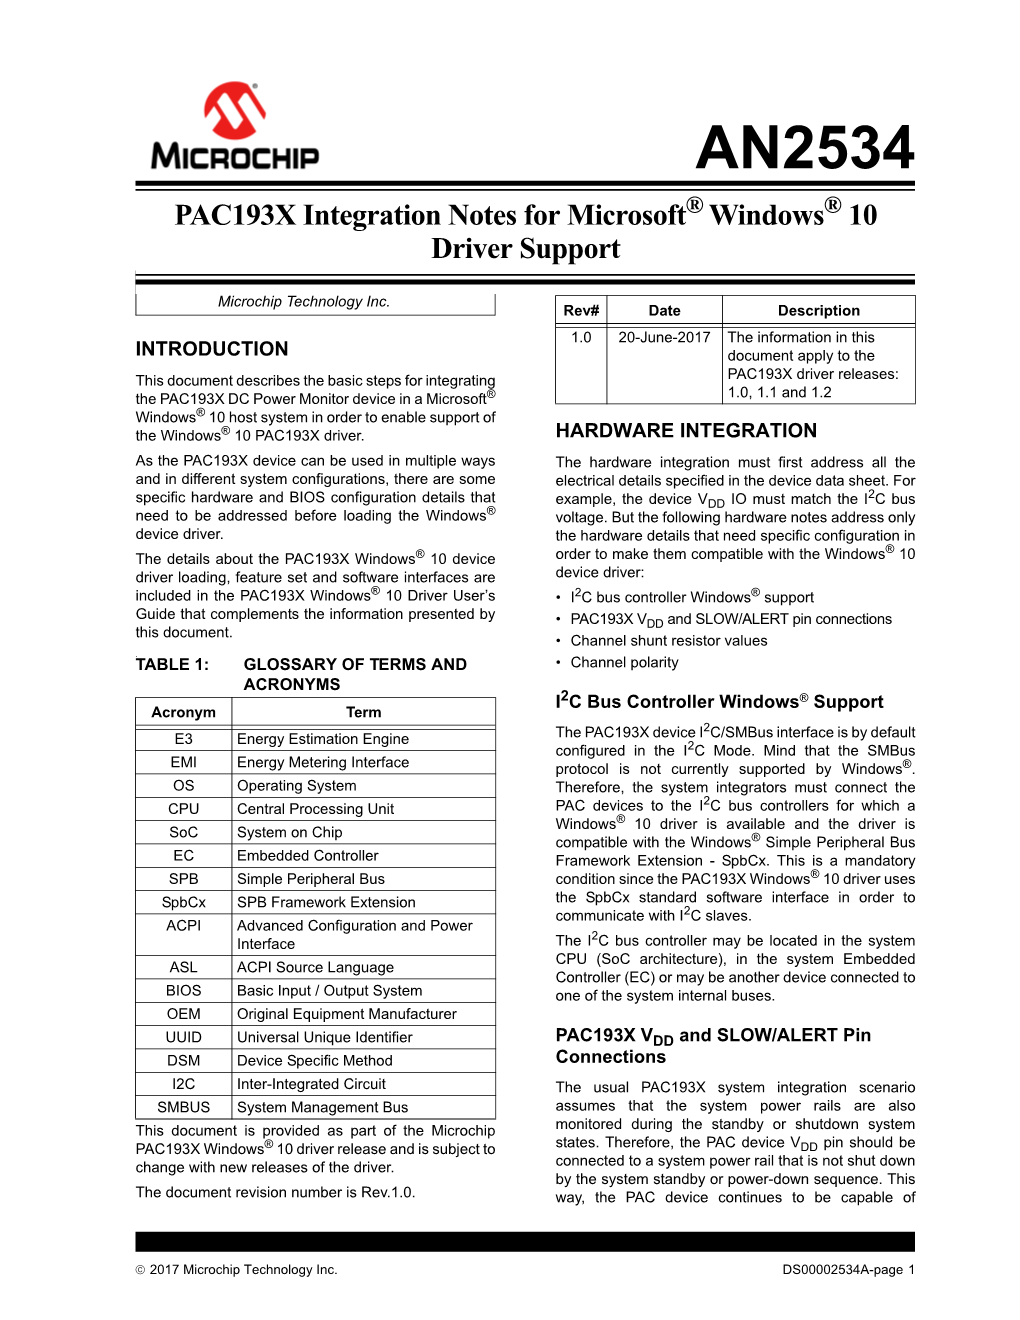 AN2534 PAC193X Integration Notes for Microsoft® Windows® 10 Driver Support Author: Razvan Ungureanu TABLE 2: REVISION HISTORY Microchip Technology Inc